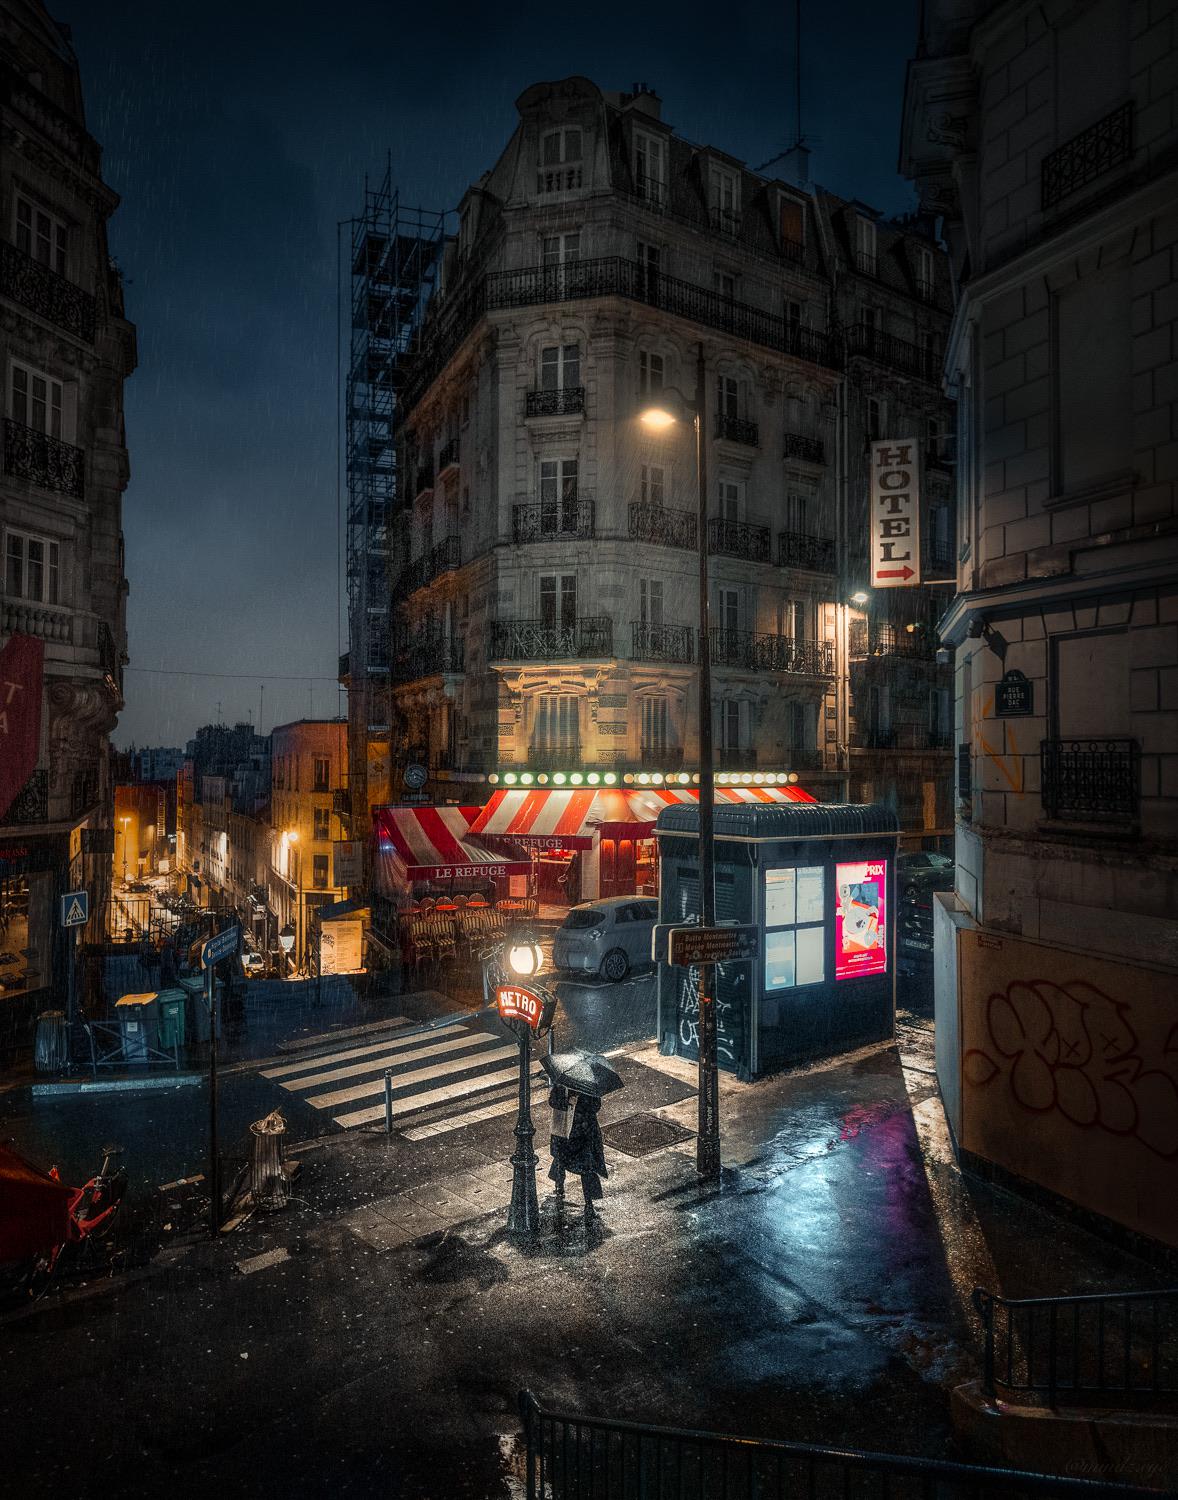 Late nights in the streets of Paris [oc]